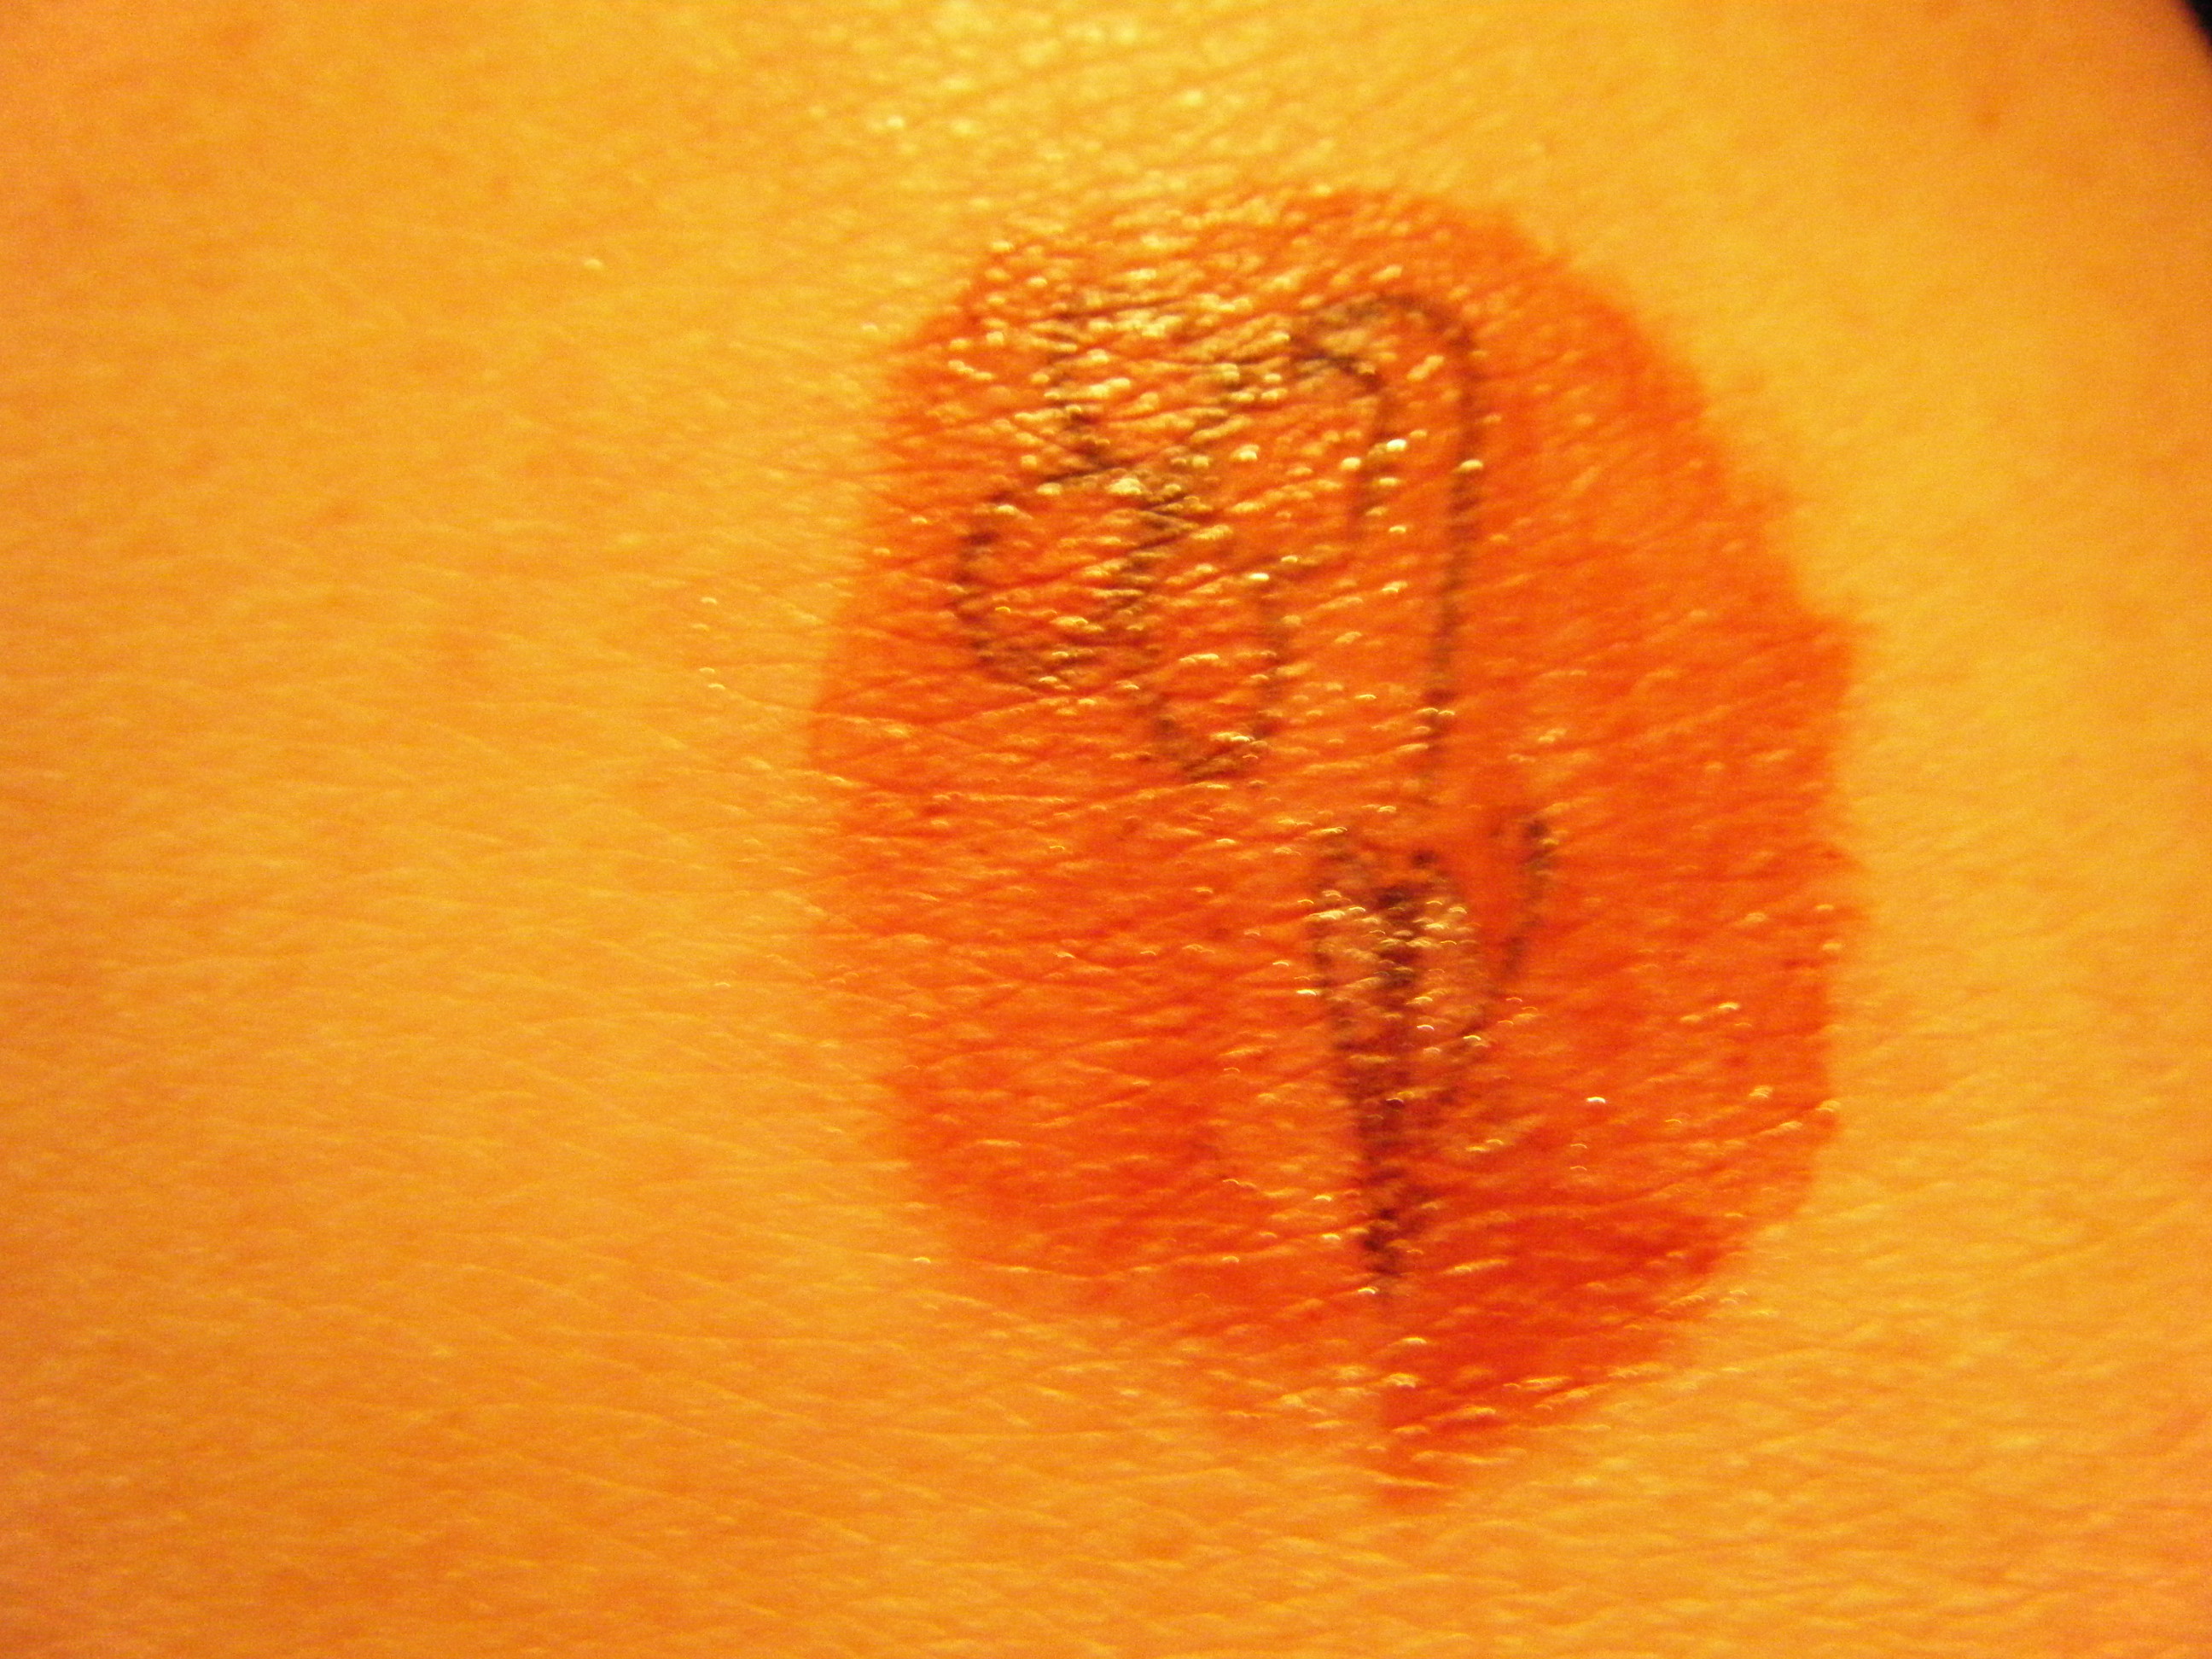 Tattoo Removal Review - Easier